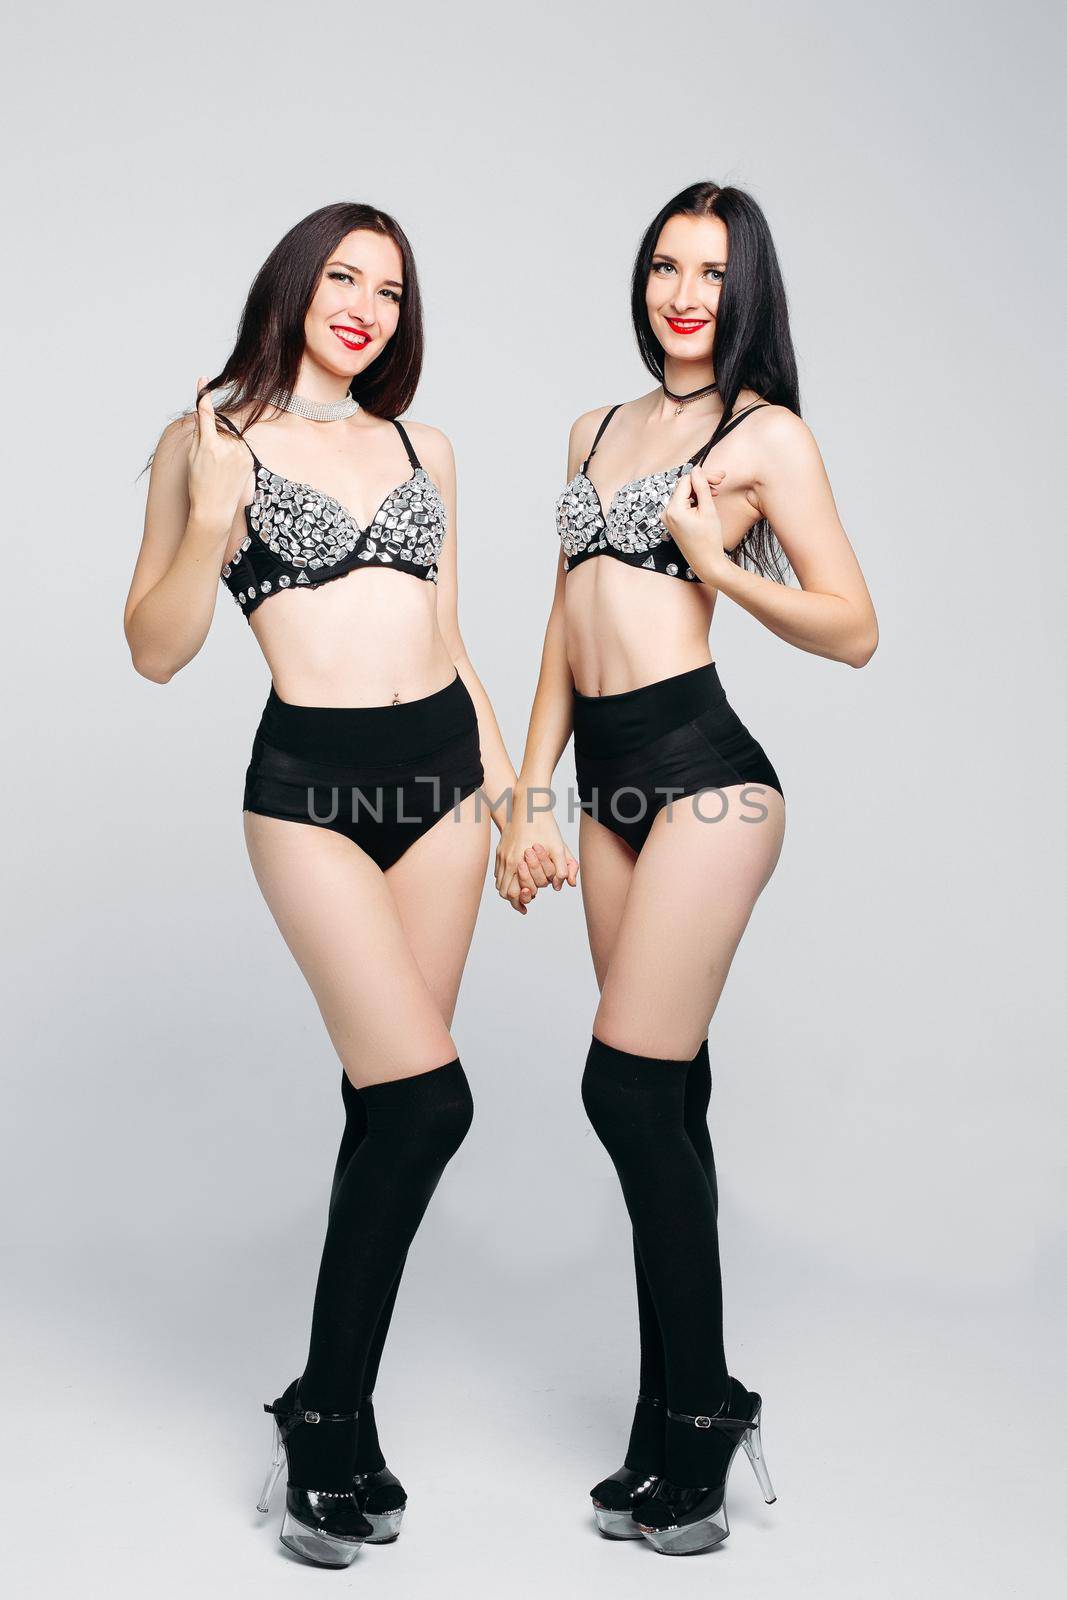 Seductive sisters twins in shine and glamorous lingerie posing with crossed hands at camera. Beautiful dancing ladies after beauty salon, before party. Night club and lingerie concept.